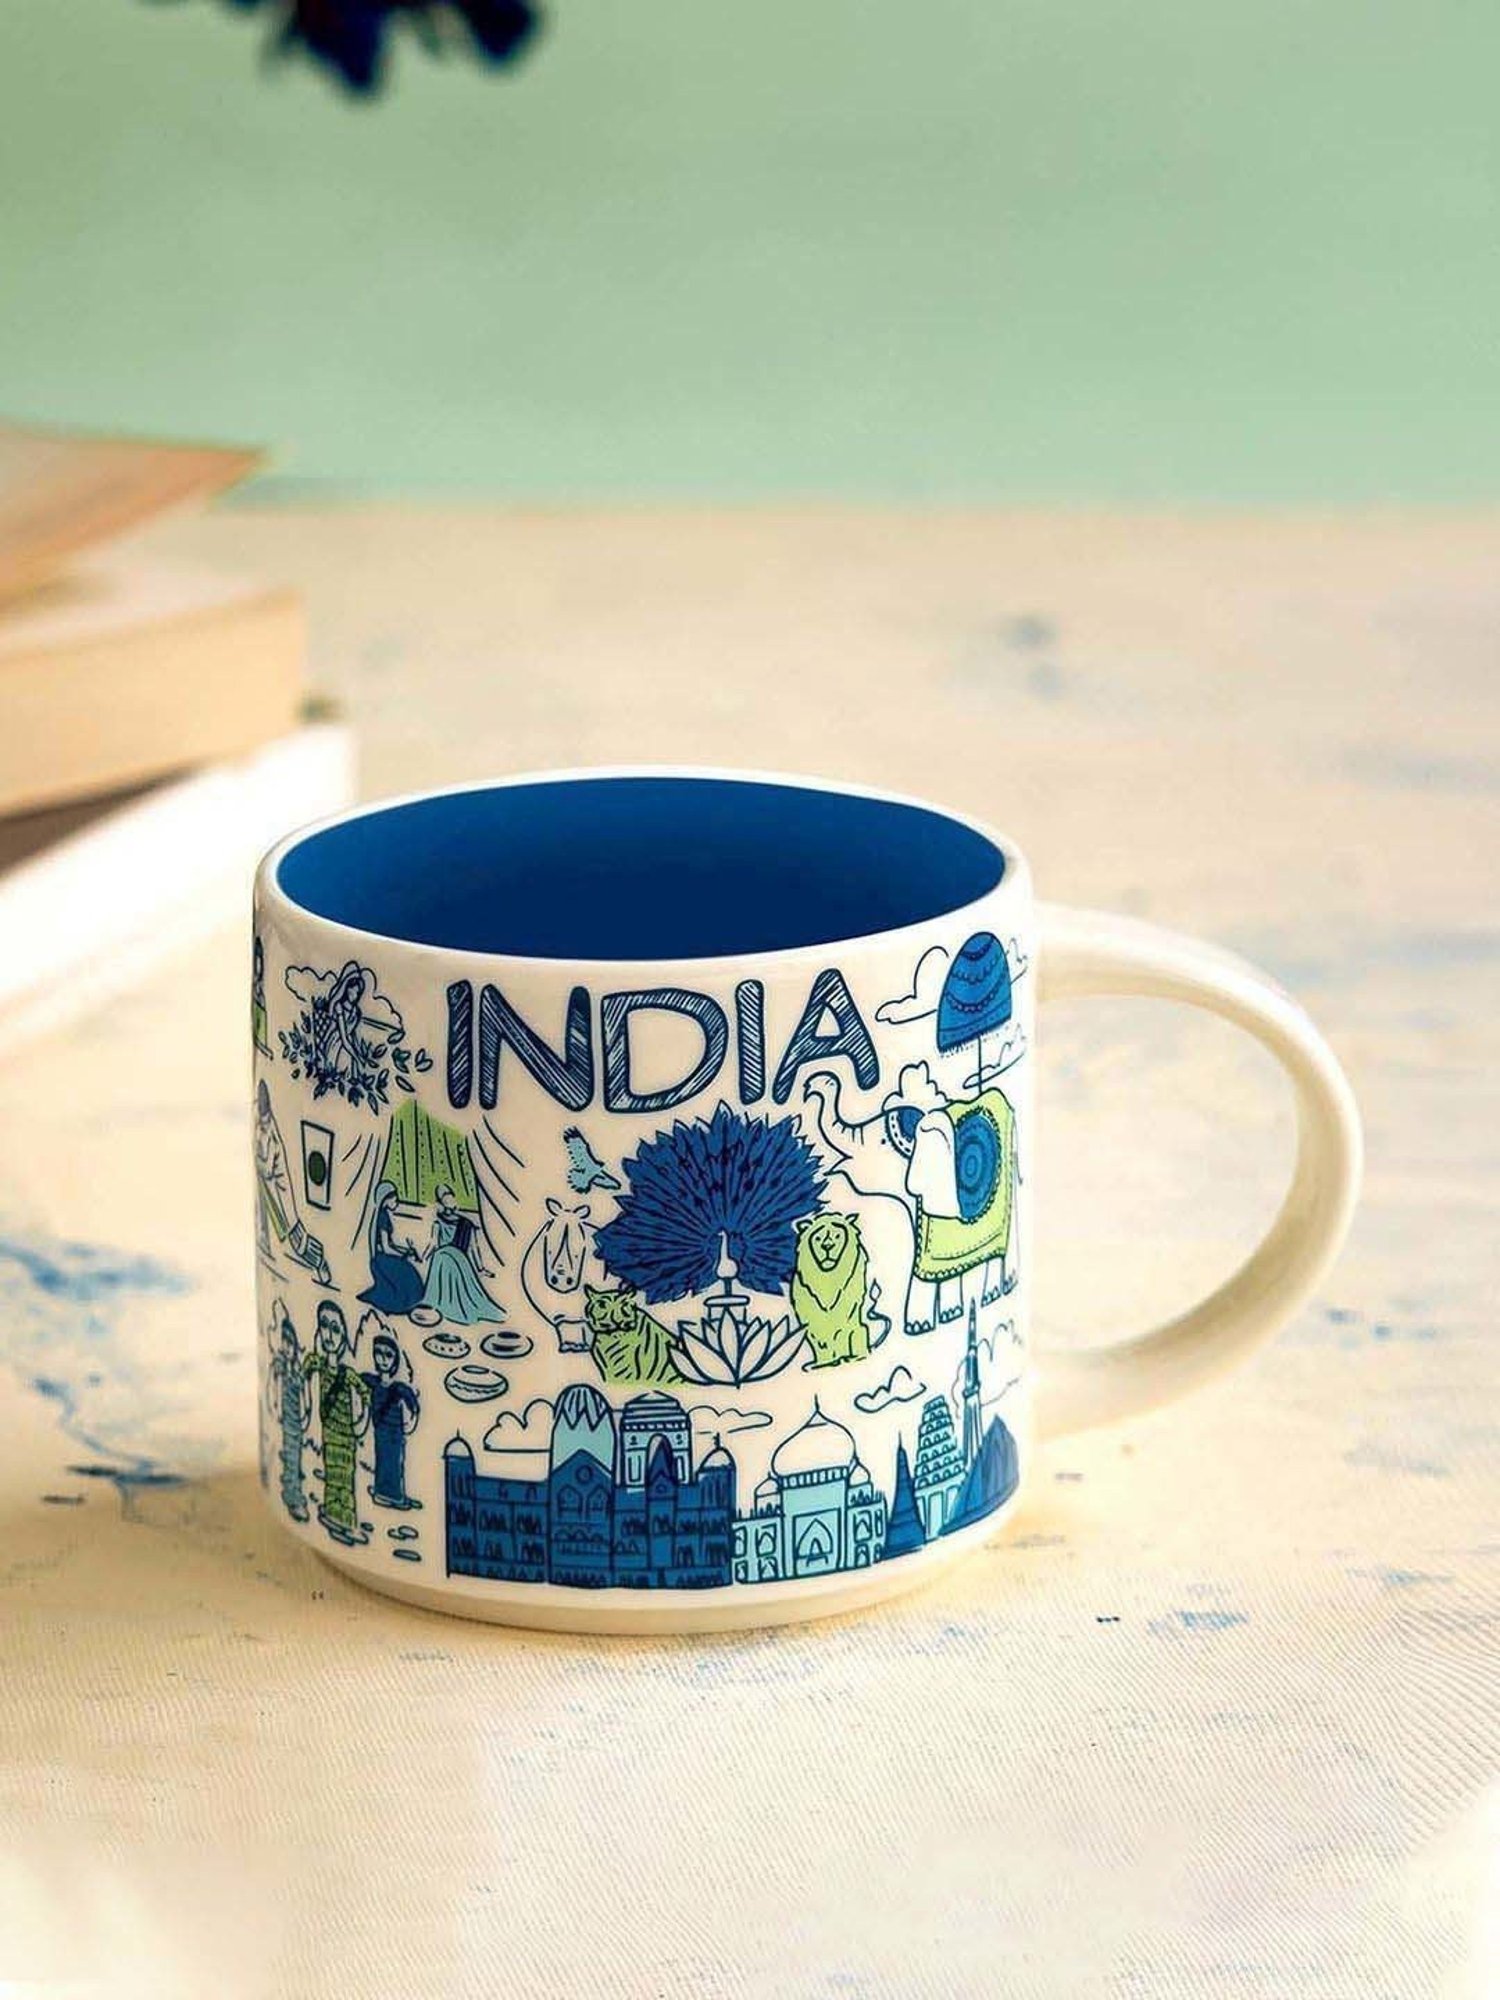 Buy Starbucks Coffee Mug - Been There Series Across The Globe (Las Vegas)  Online at Low Prices in India 